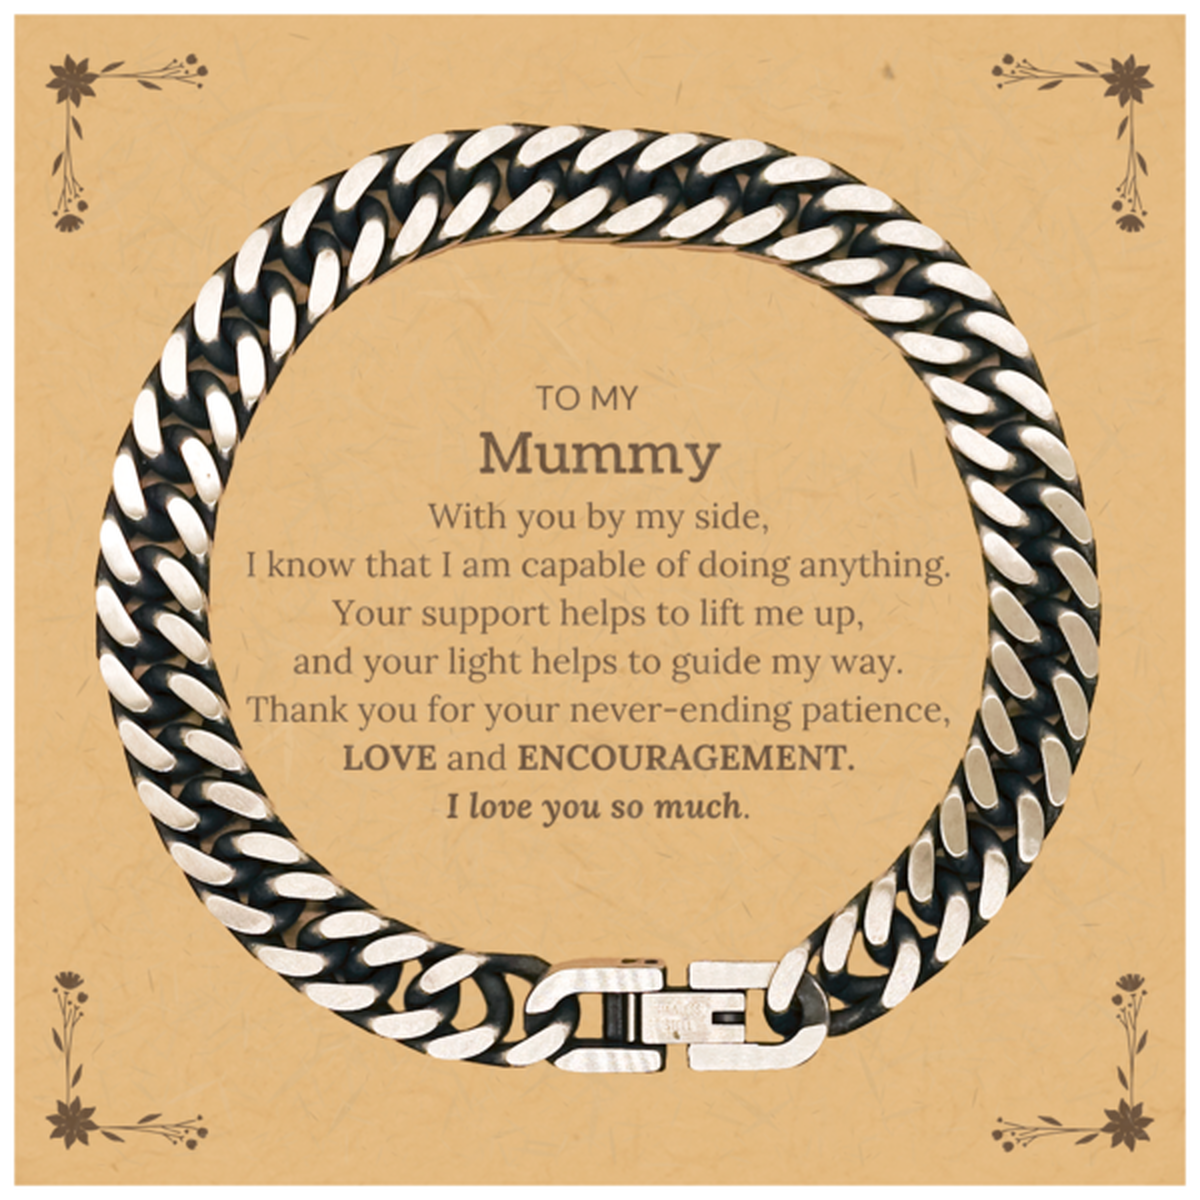 Appreciation Mummy Cuban Link Chain Bracelet Gifts, To My Mummy Birthday Christmas Wedding Keepsake Gifts for Mummy With you by my side, I know that I am capable of doing anything. I love you so much